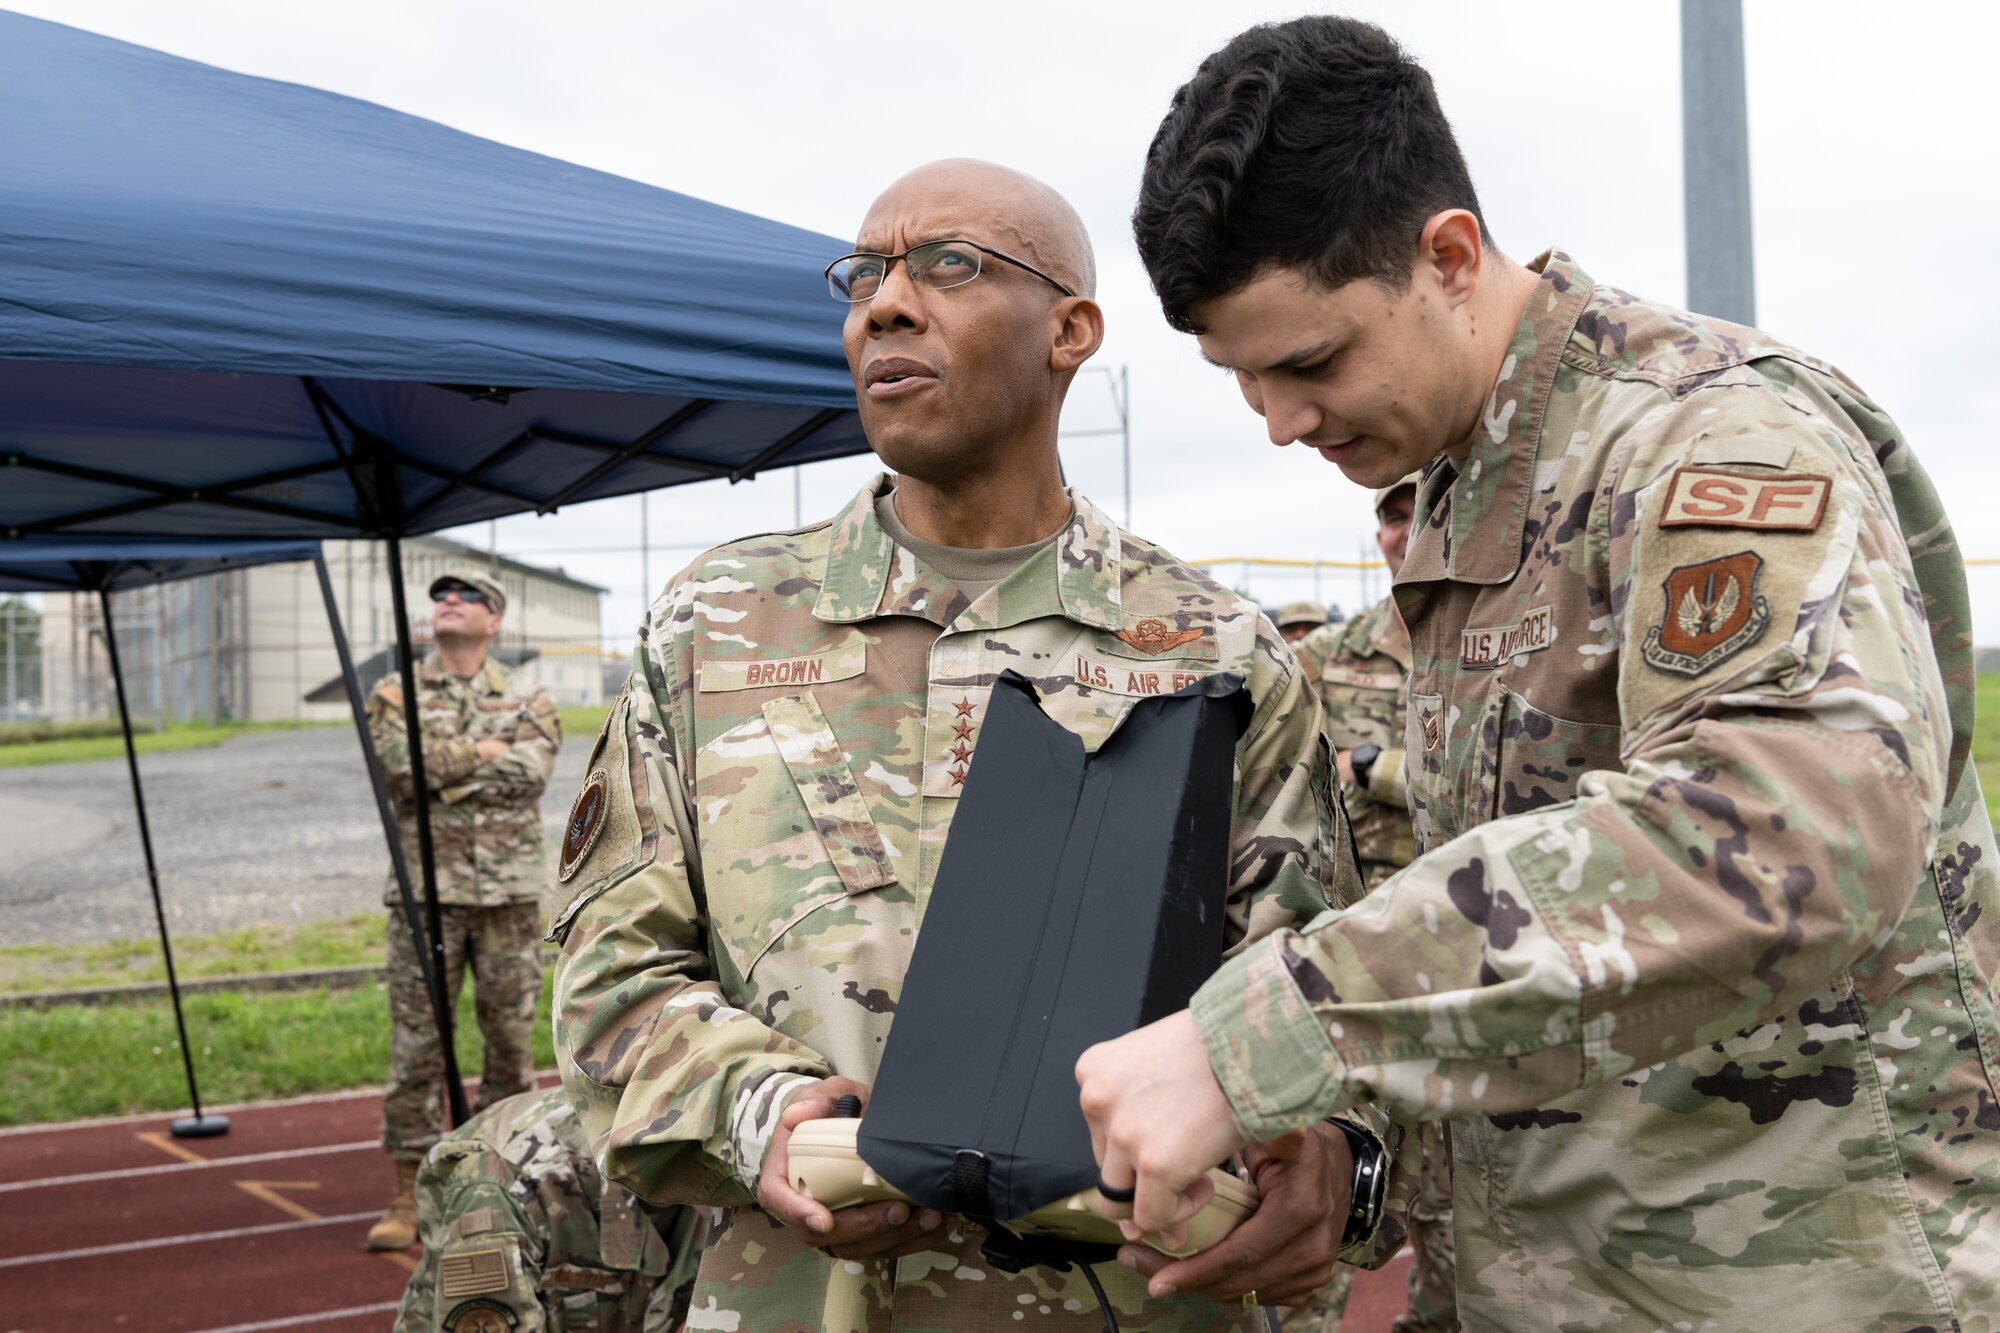 U.S. Air Force Staff Sgt. Mason Meyer, 52nd Security Forces Squadron Base Defense Operations Center controller (right), demonstrates operating an unmanned aerial vehicle with U.S. Air Force Chief of Staff Gen. CQ Brown Jr. July 16, 2021, on Spangdahlem Air Base, Germany.